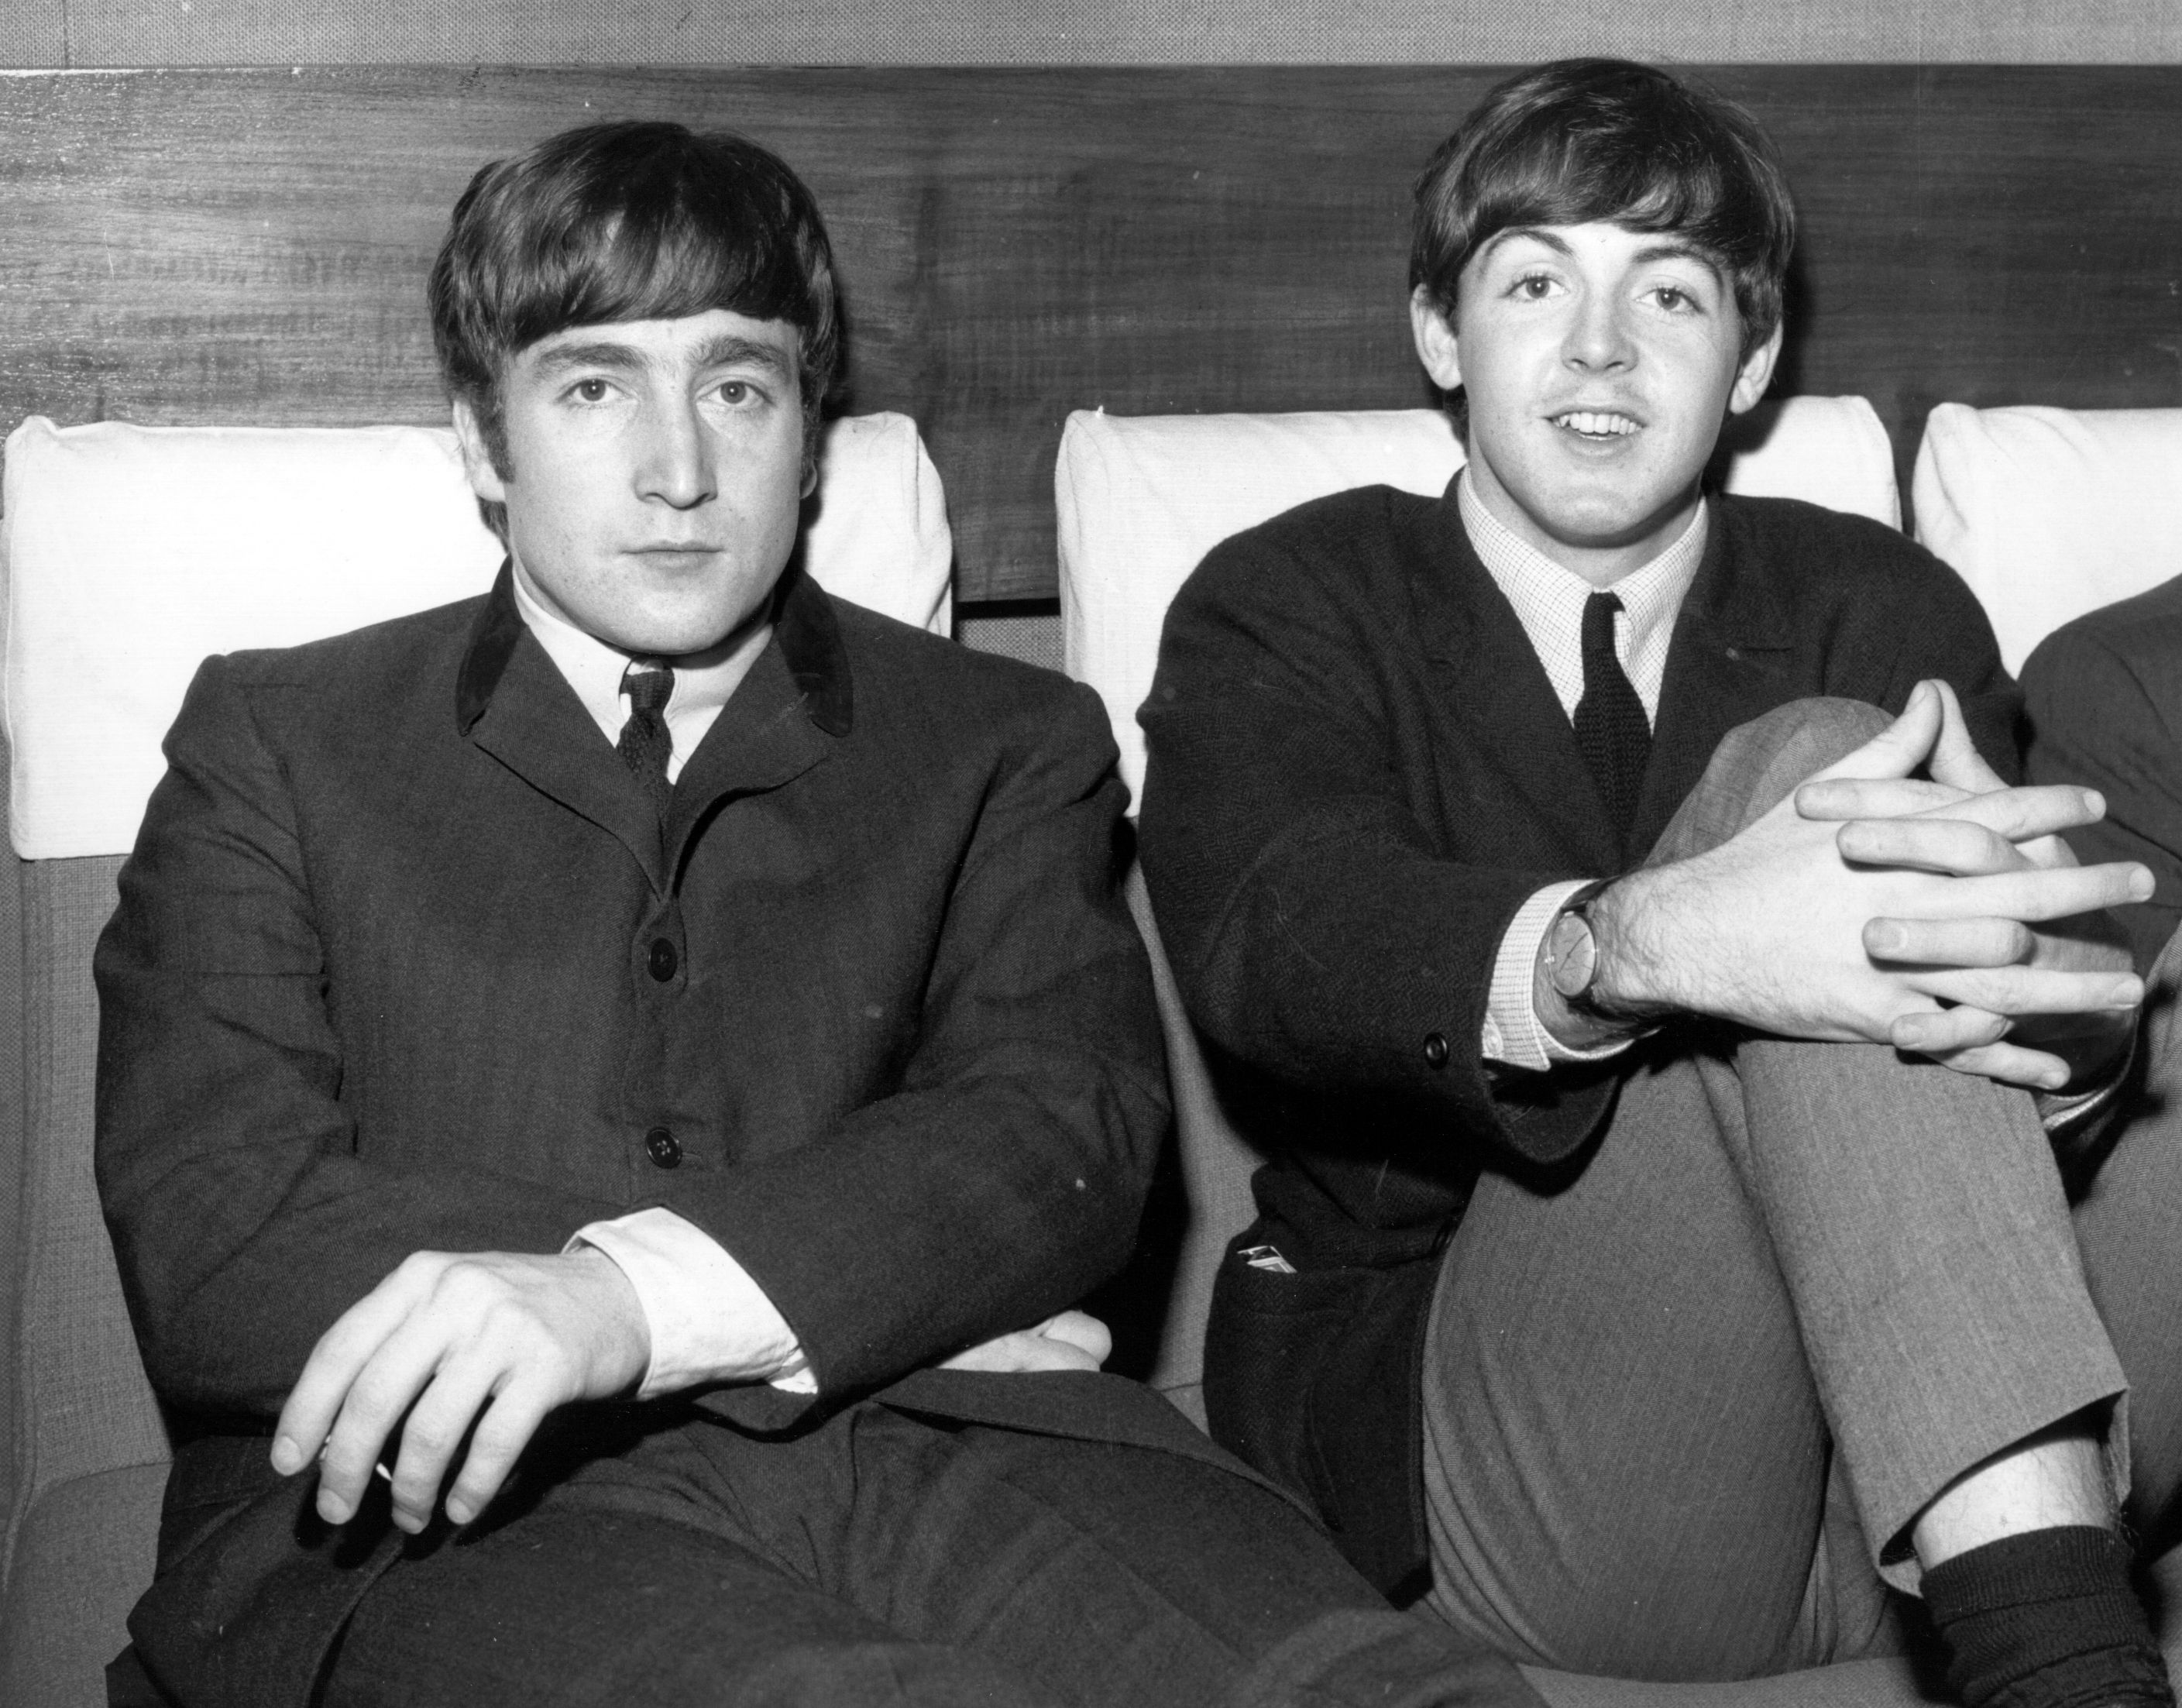 A black and white picture of John Lennon and Paul McCartney sitting on a couch together.